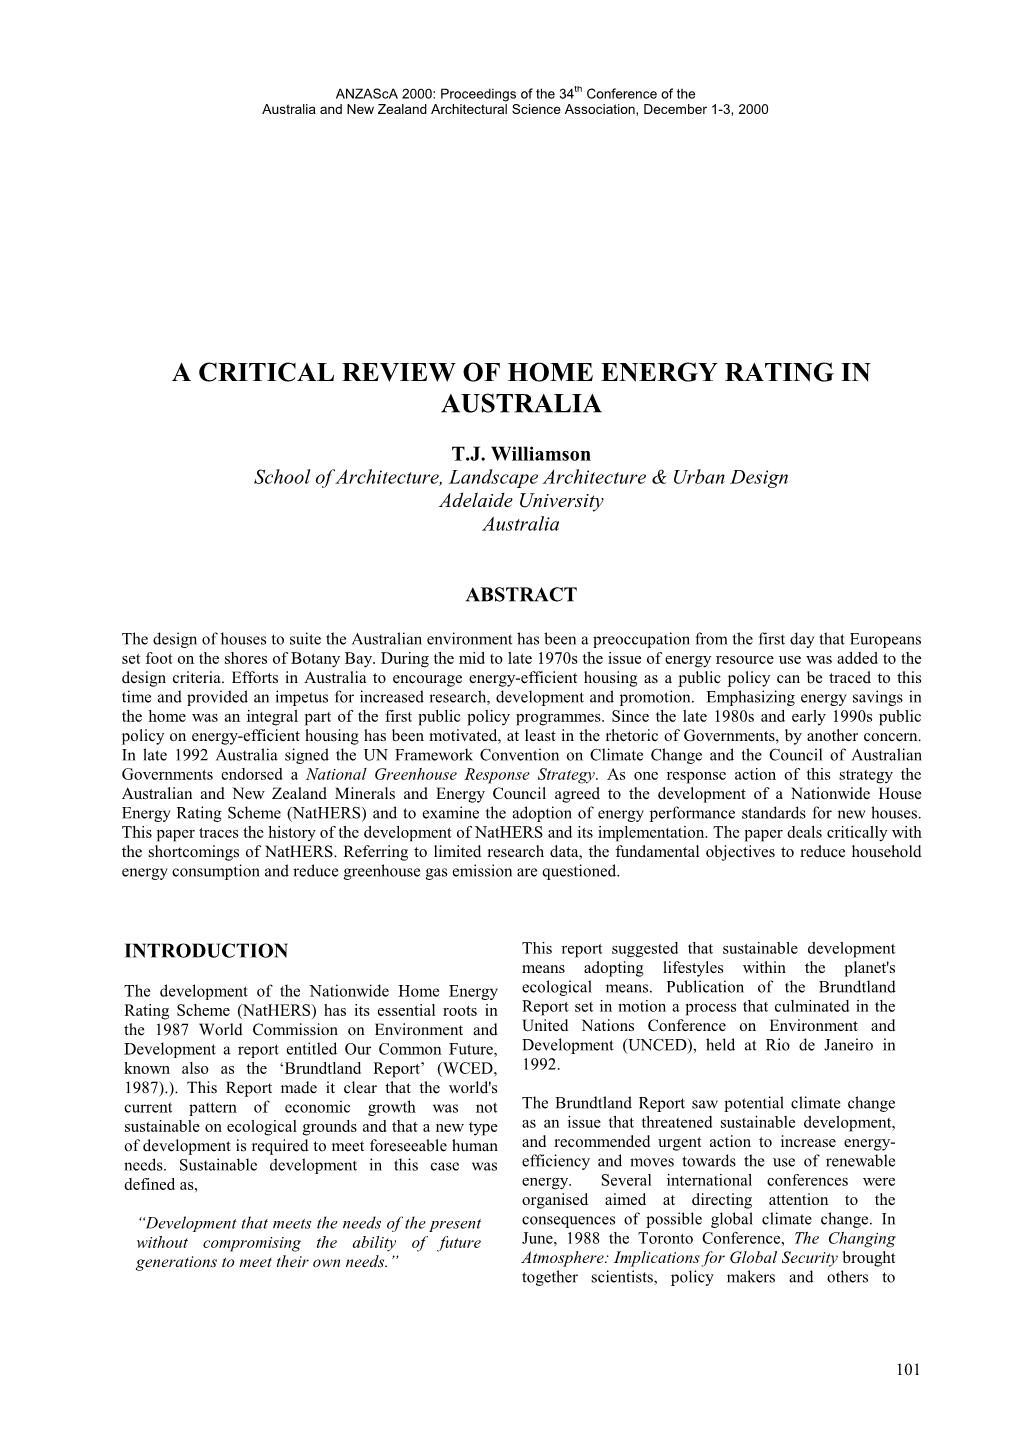 A Critical Review of Home Energy Rating in Australia